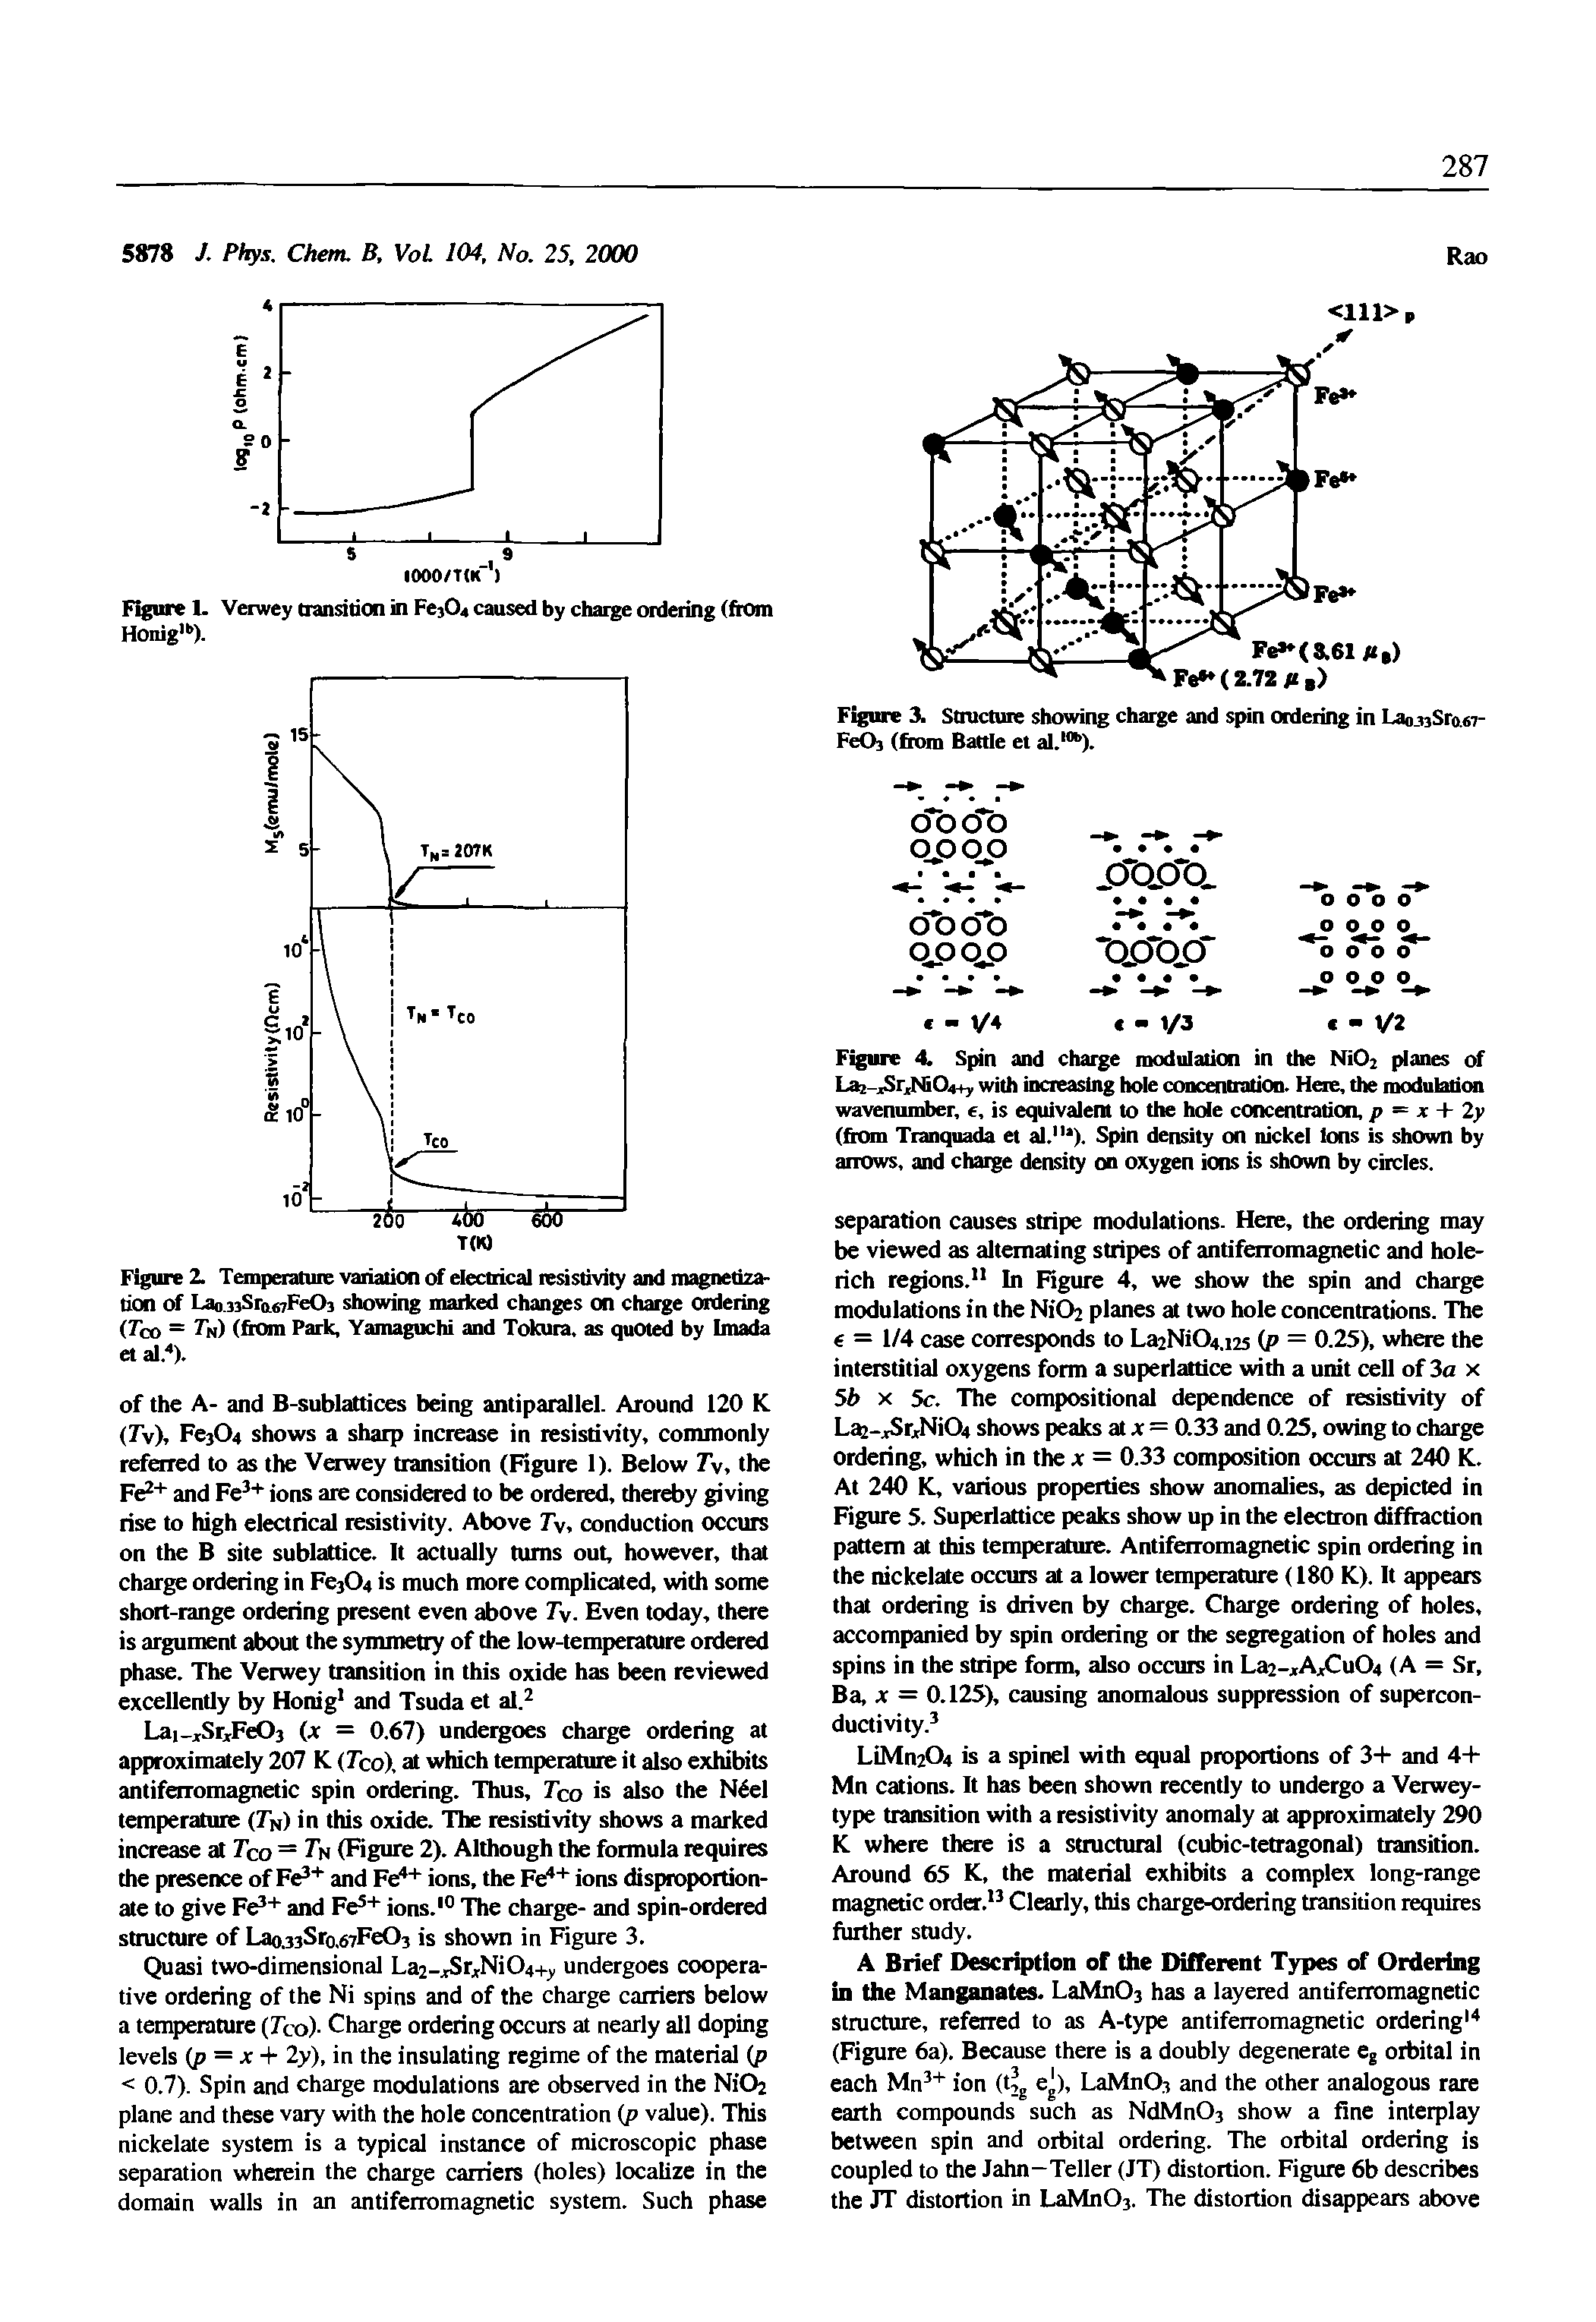 Figure I- Verwey transition in Fe304 caused by charge ordering (from Honig,b).